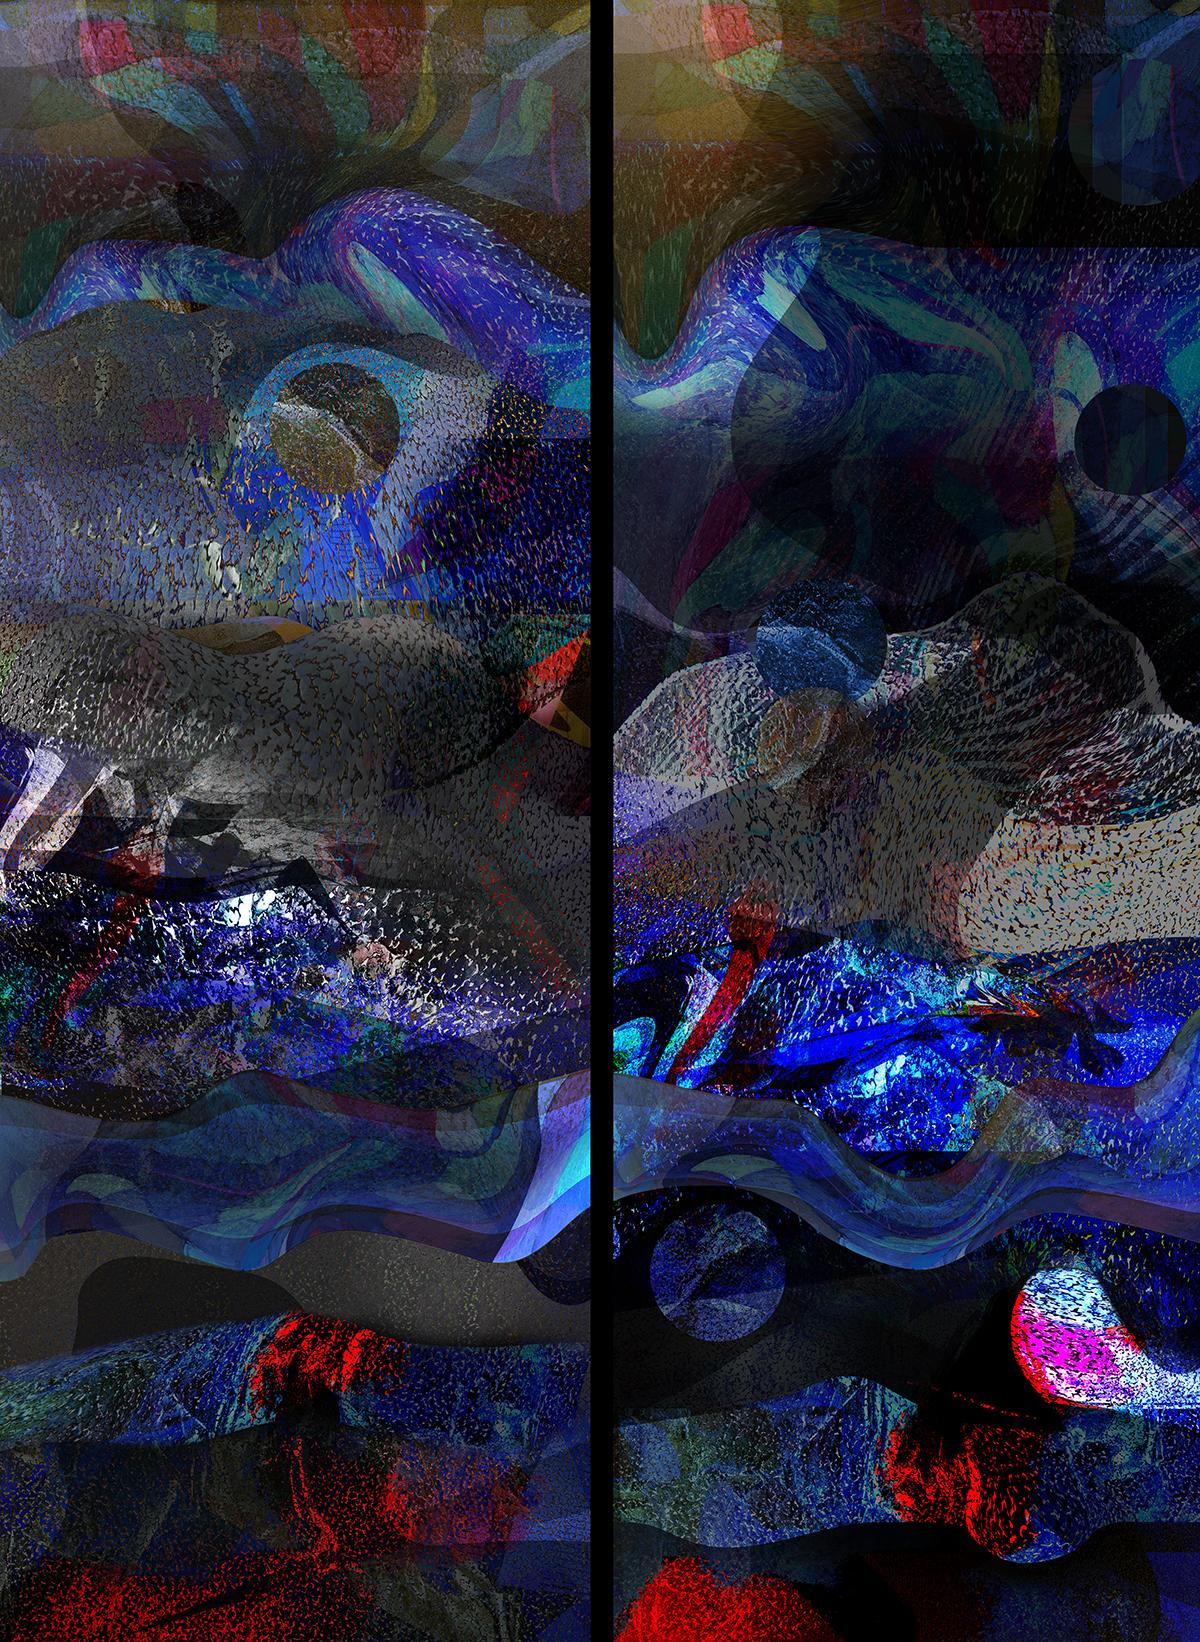 Marvin Berk Abstract Print - "Cosmic Explorations #3" - Abstract vertical photomontage in cool colors.